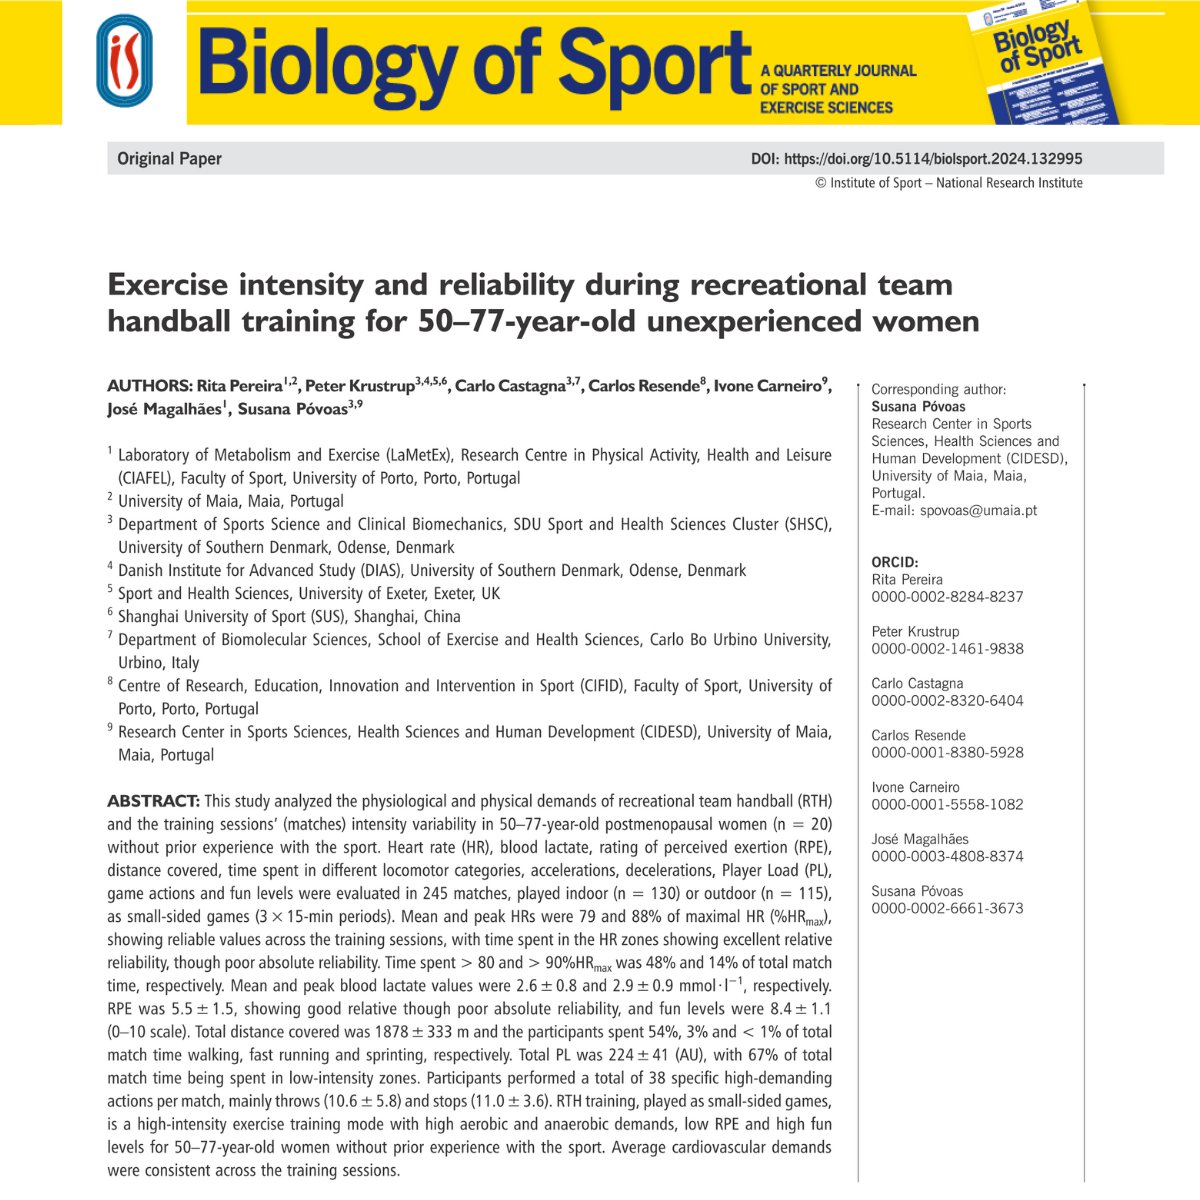 📈This study analyzed the physiological and physical demands of recreational team #handball and the training sessions’ intensity variability in 50–77-year-old postmenopausal women🤾‍♂️ 🖊️Rita Pereira, Peter Krustrup, Carlo Castagna et al. 🔓#OpenAccess🔗termedia.pl/Exercise-inten…